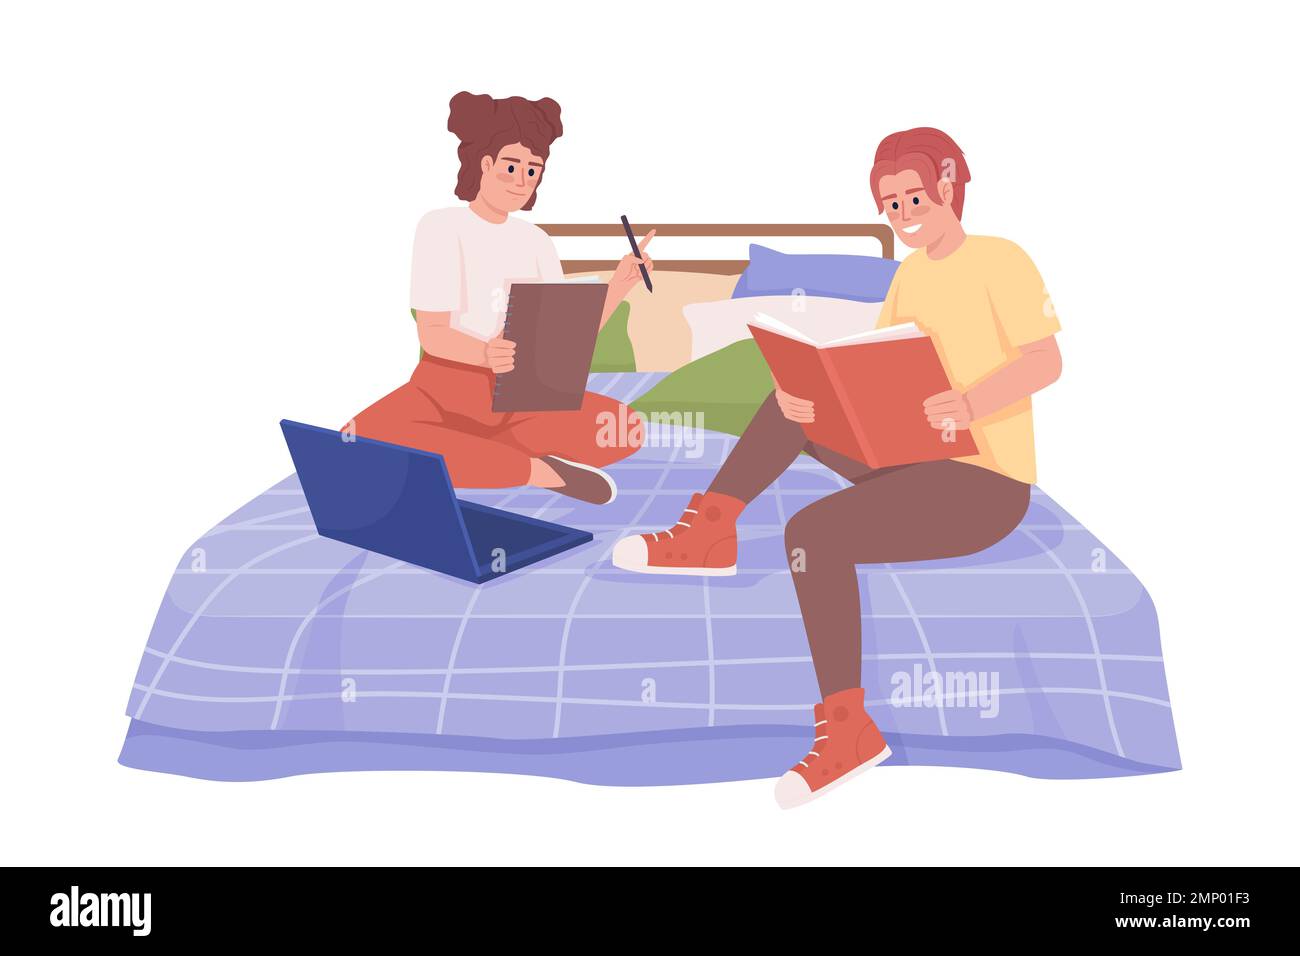 How You Doing Stock Illustrations – 68 How You Doing Stock Illustrations,  Vectors & Clipart - Dreamstime